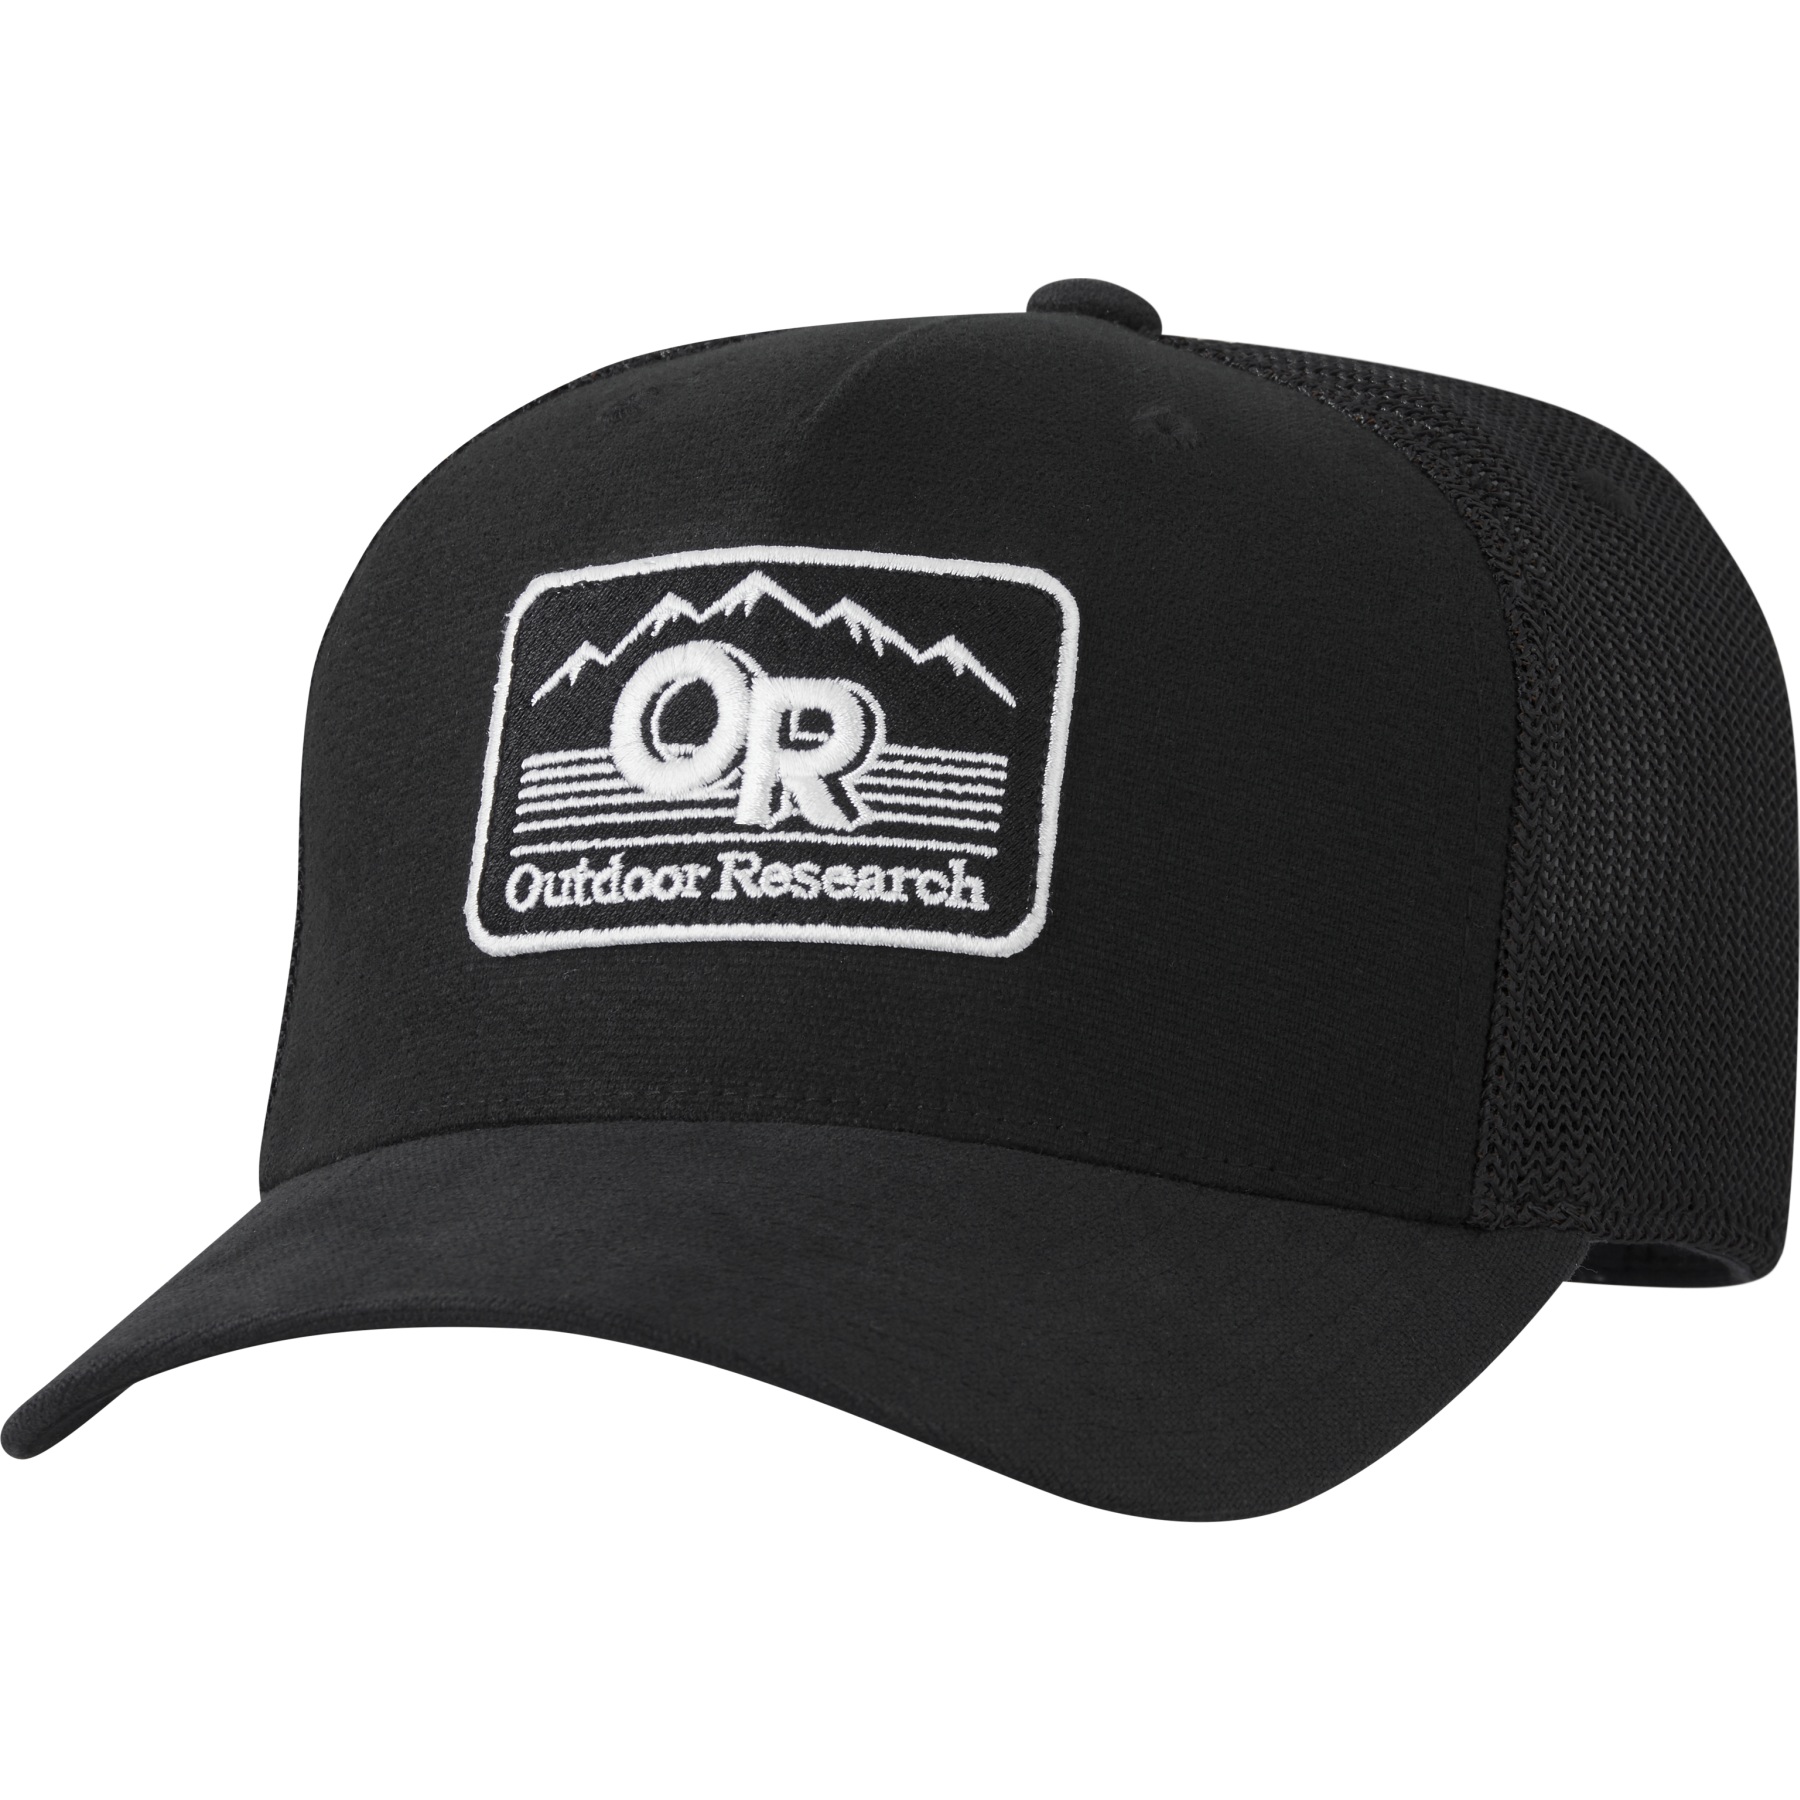 Picture of Outdoor Research Advocate Trucker Cap - black